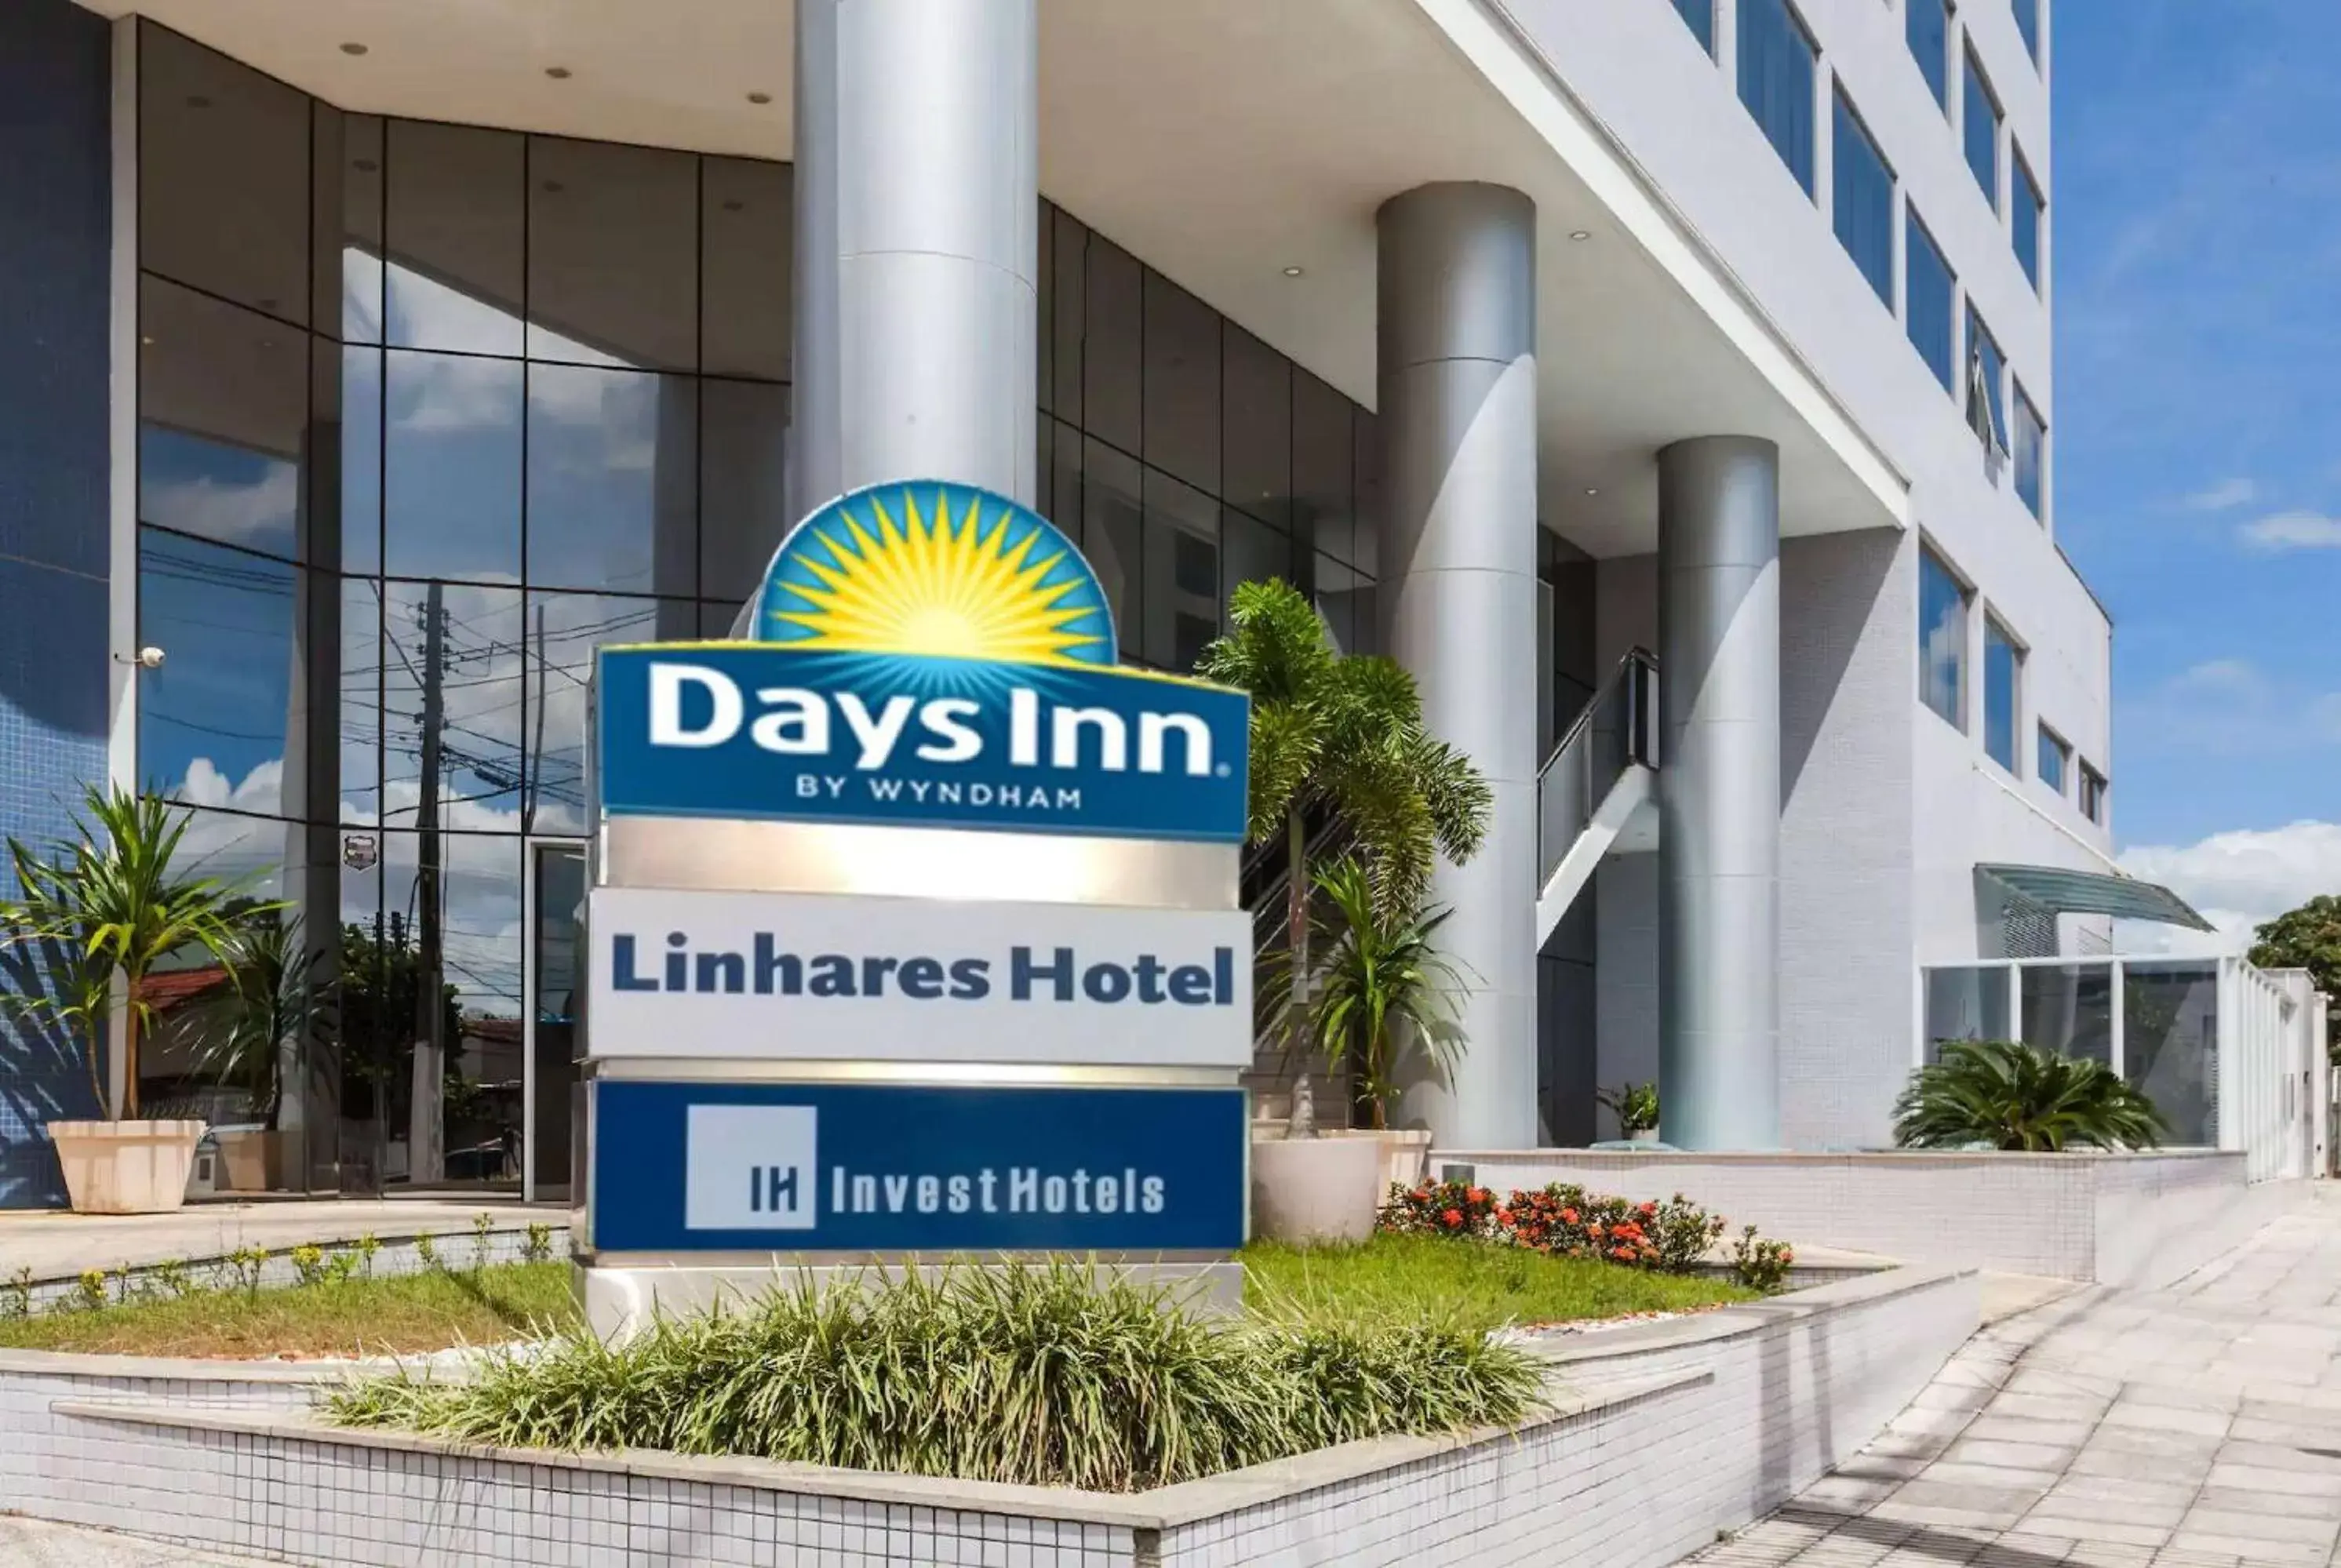 Property Building in Days Inn by Wyndham Linhares